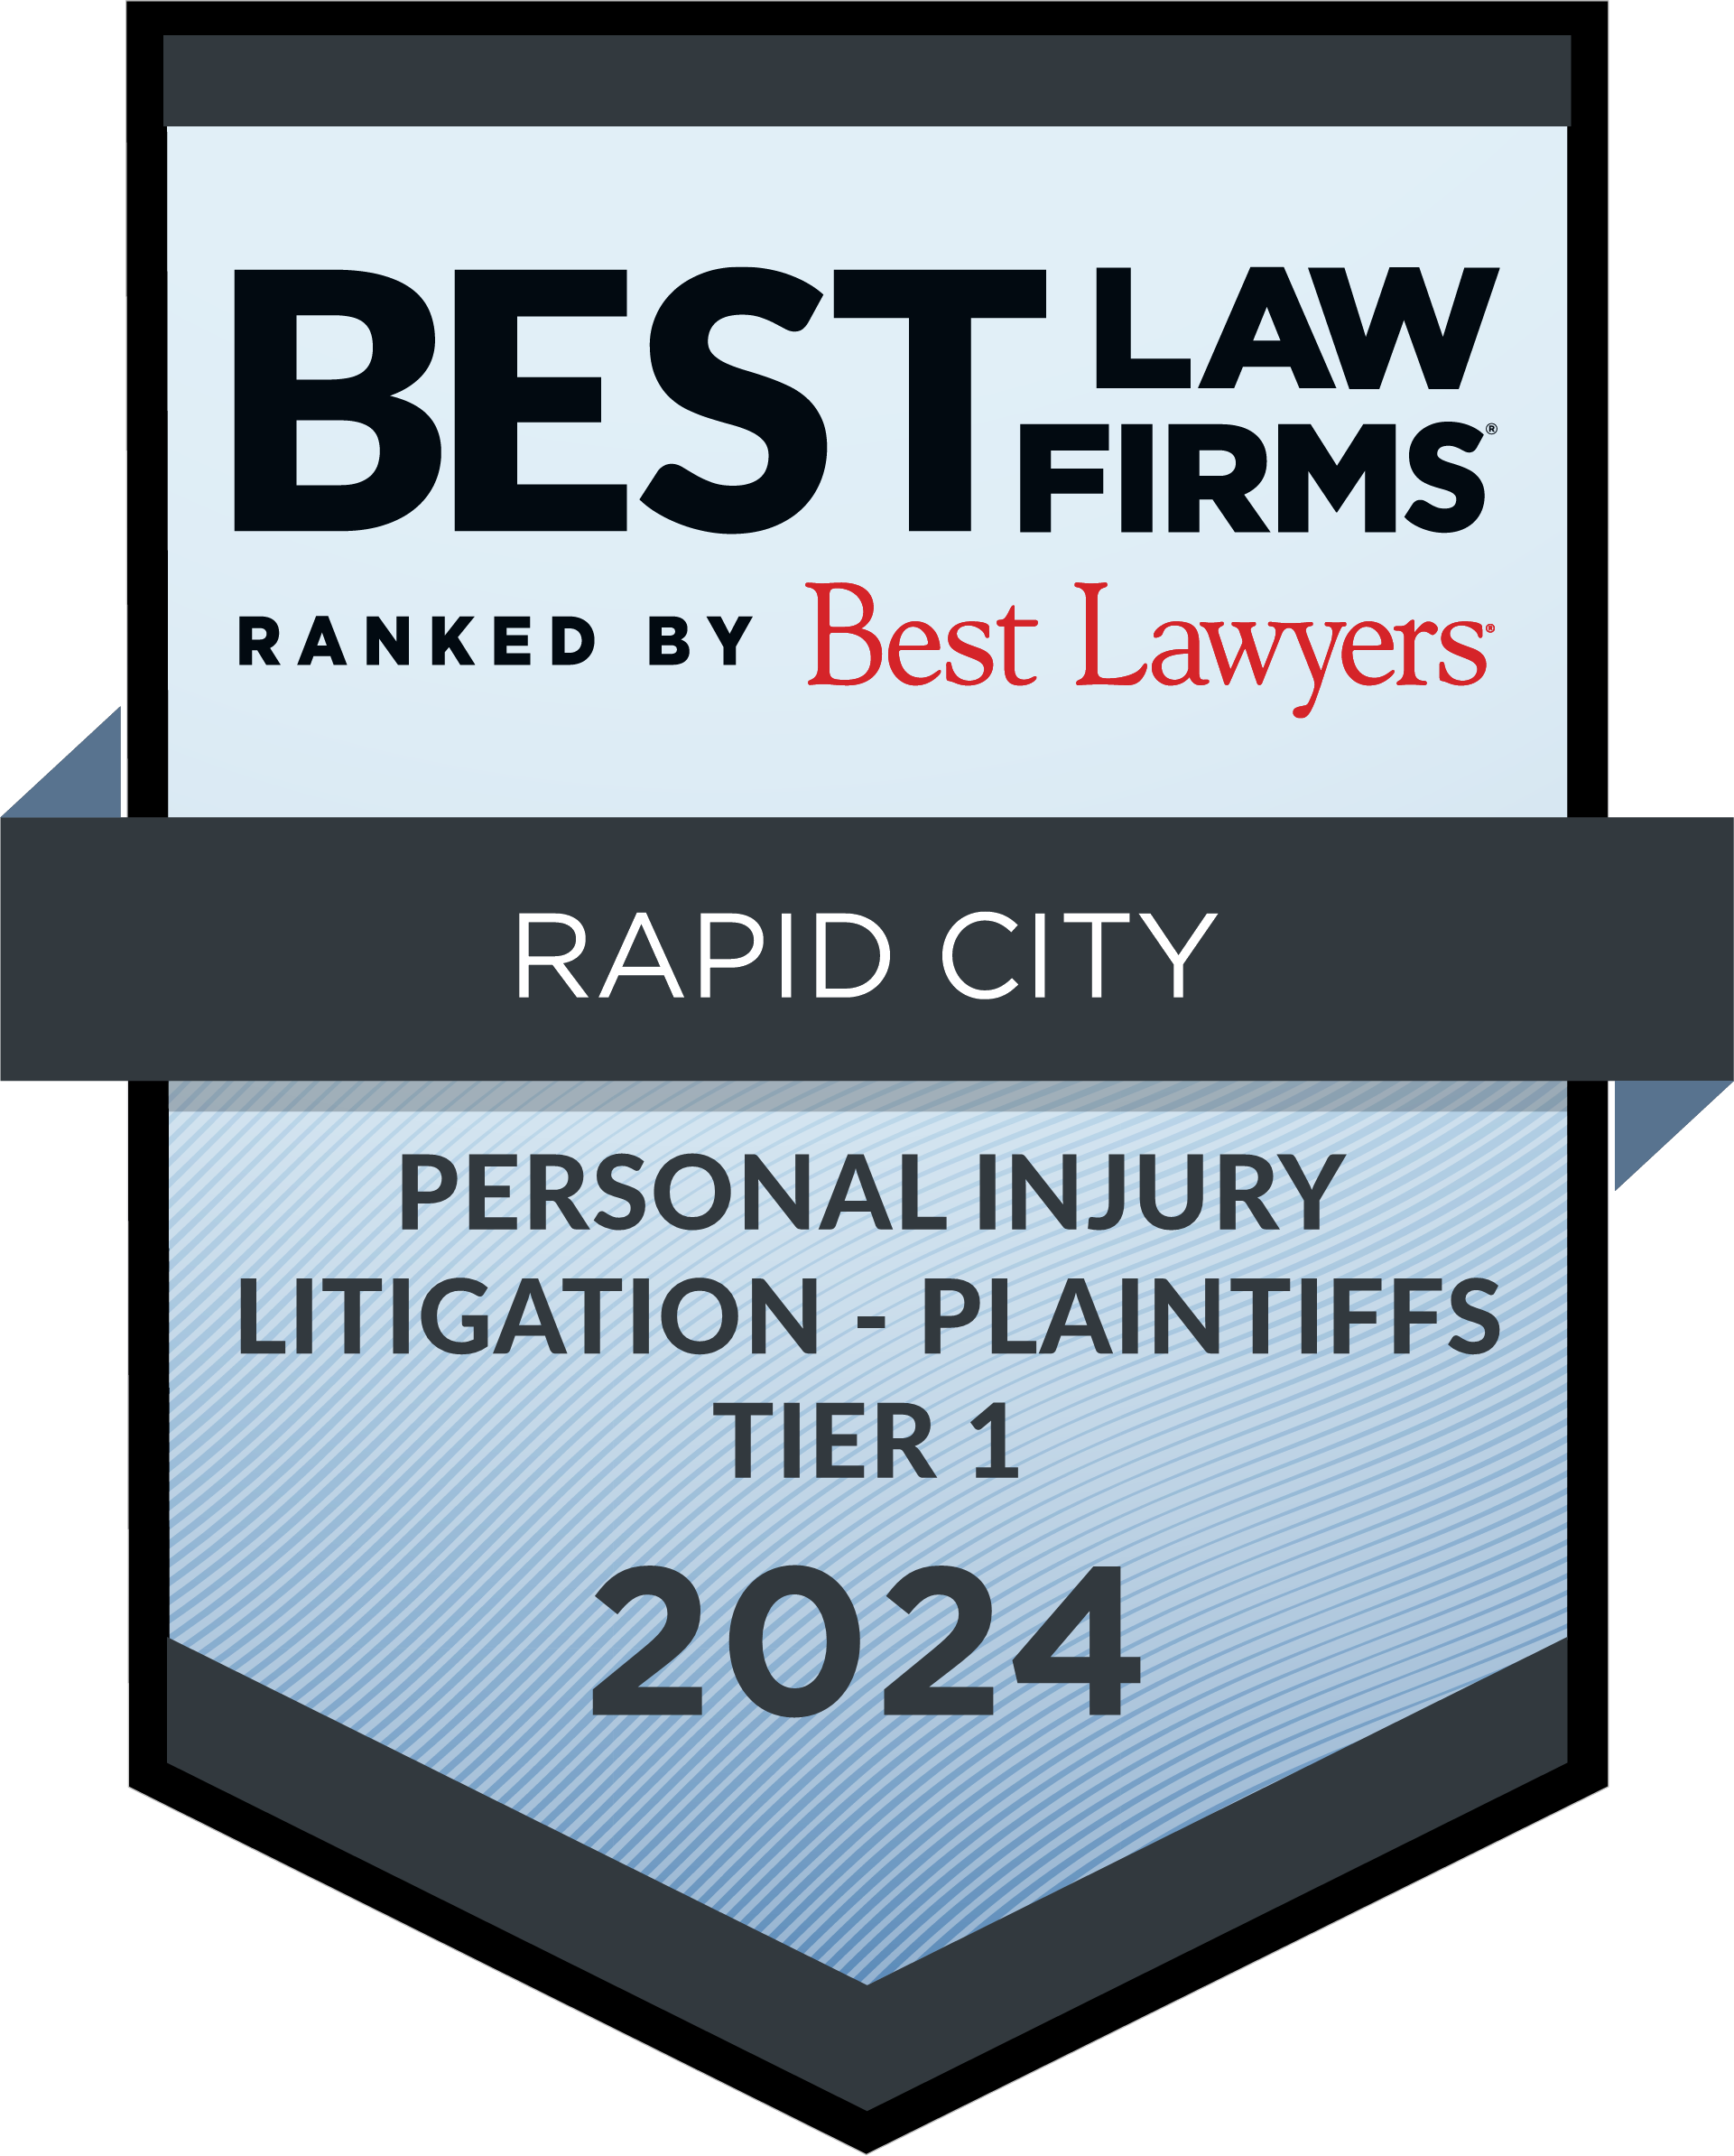 Best Law Firms Ranked By Best Lawyers Rapid City Personal Injury Litigation - Plaintiffs Tier 1 2024